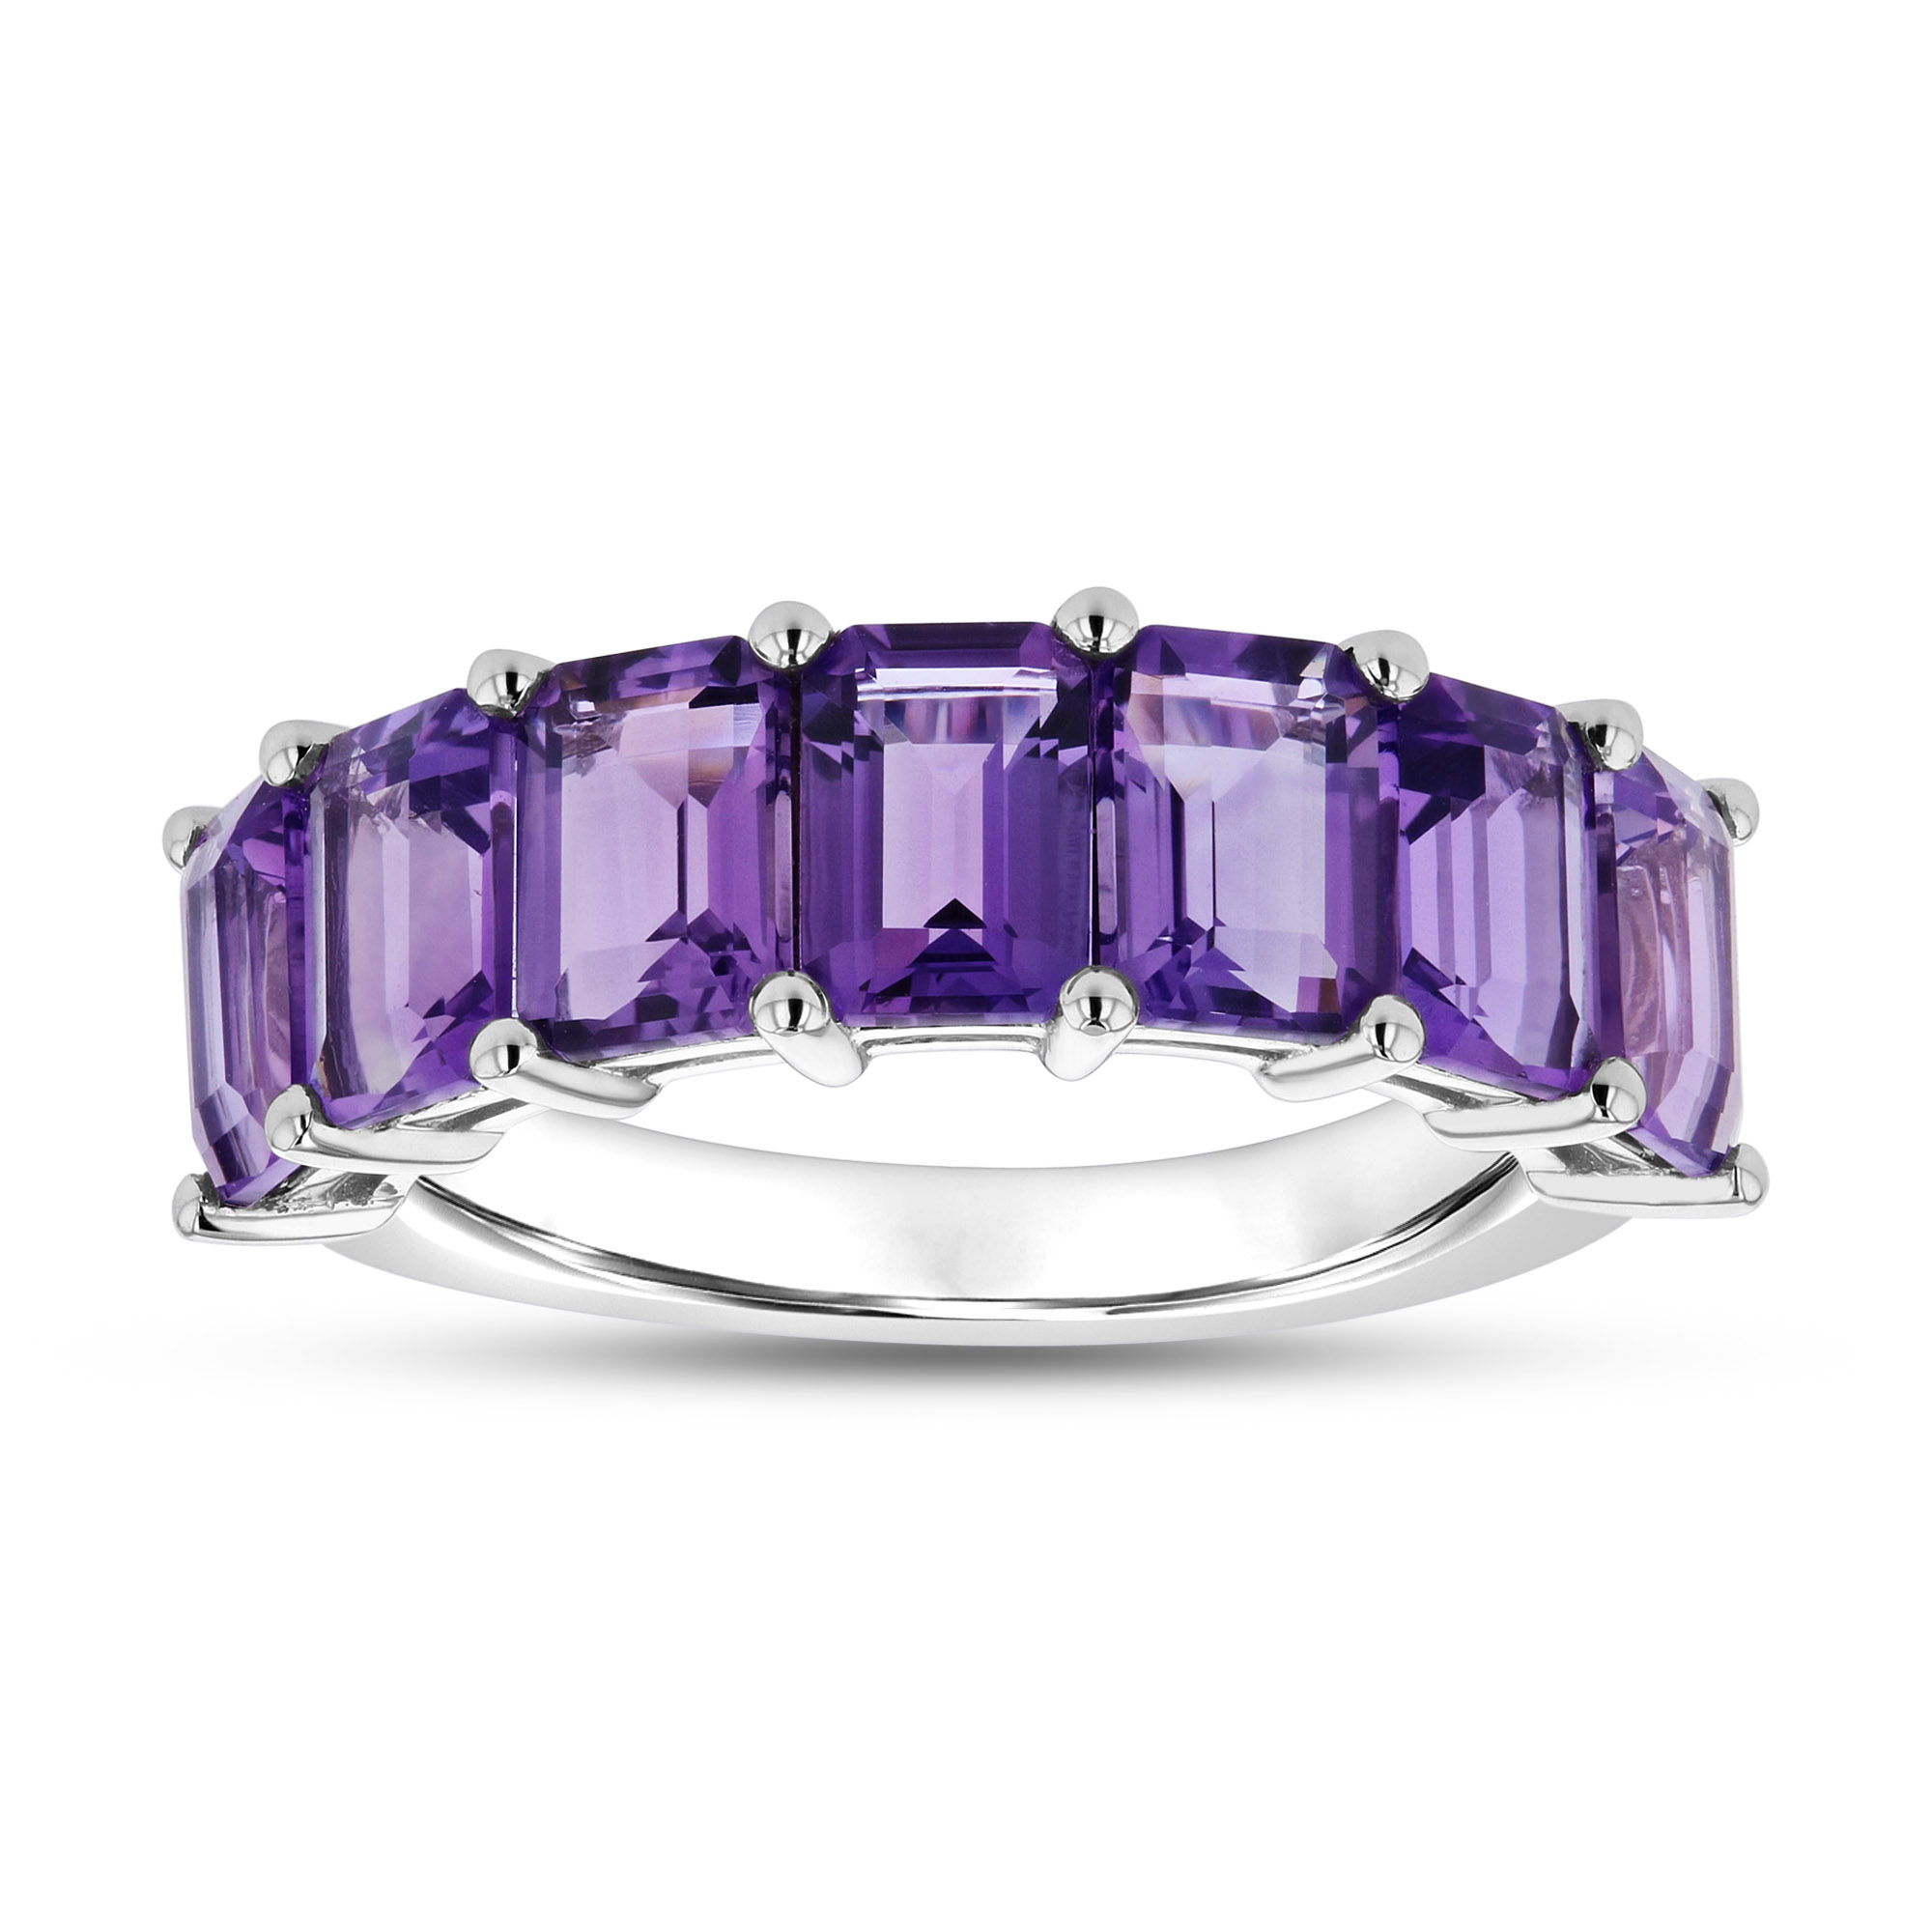 View 3.56ctw Emerald Cut Amethyst Wedding Band in 14k White Gold